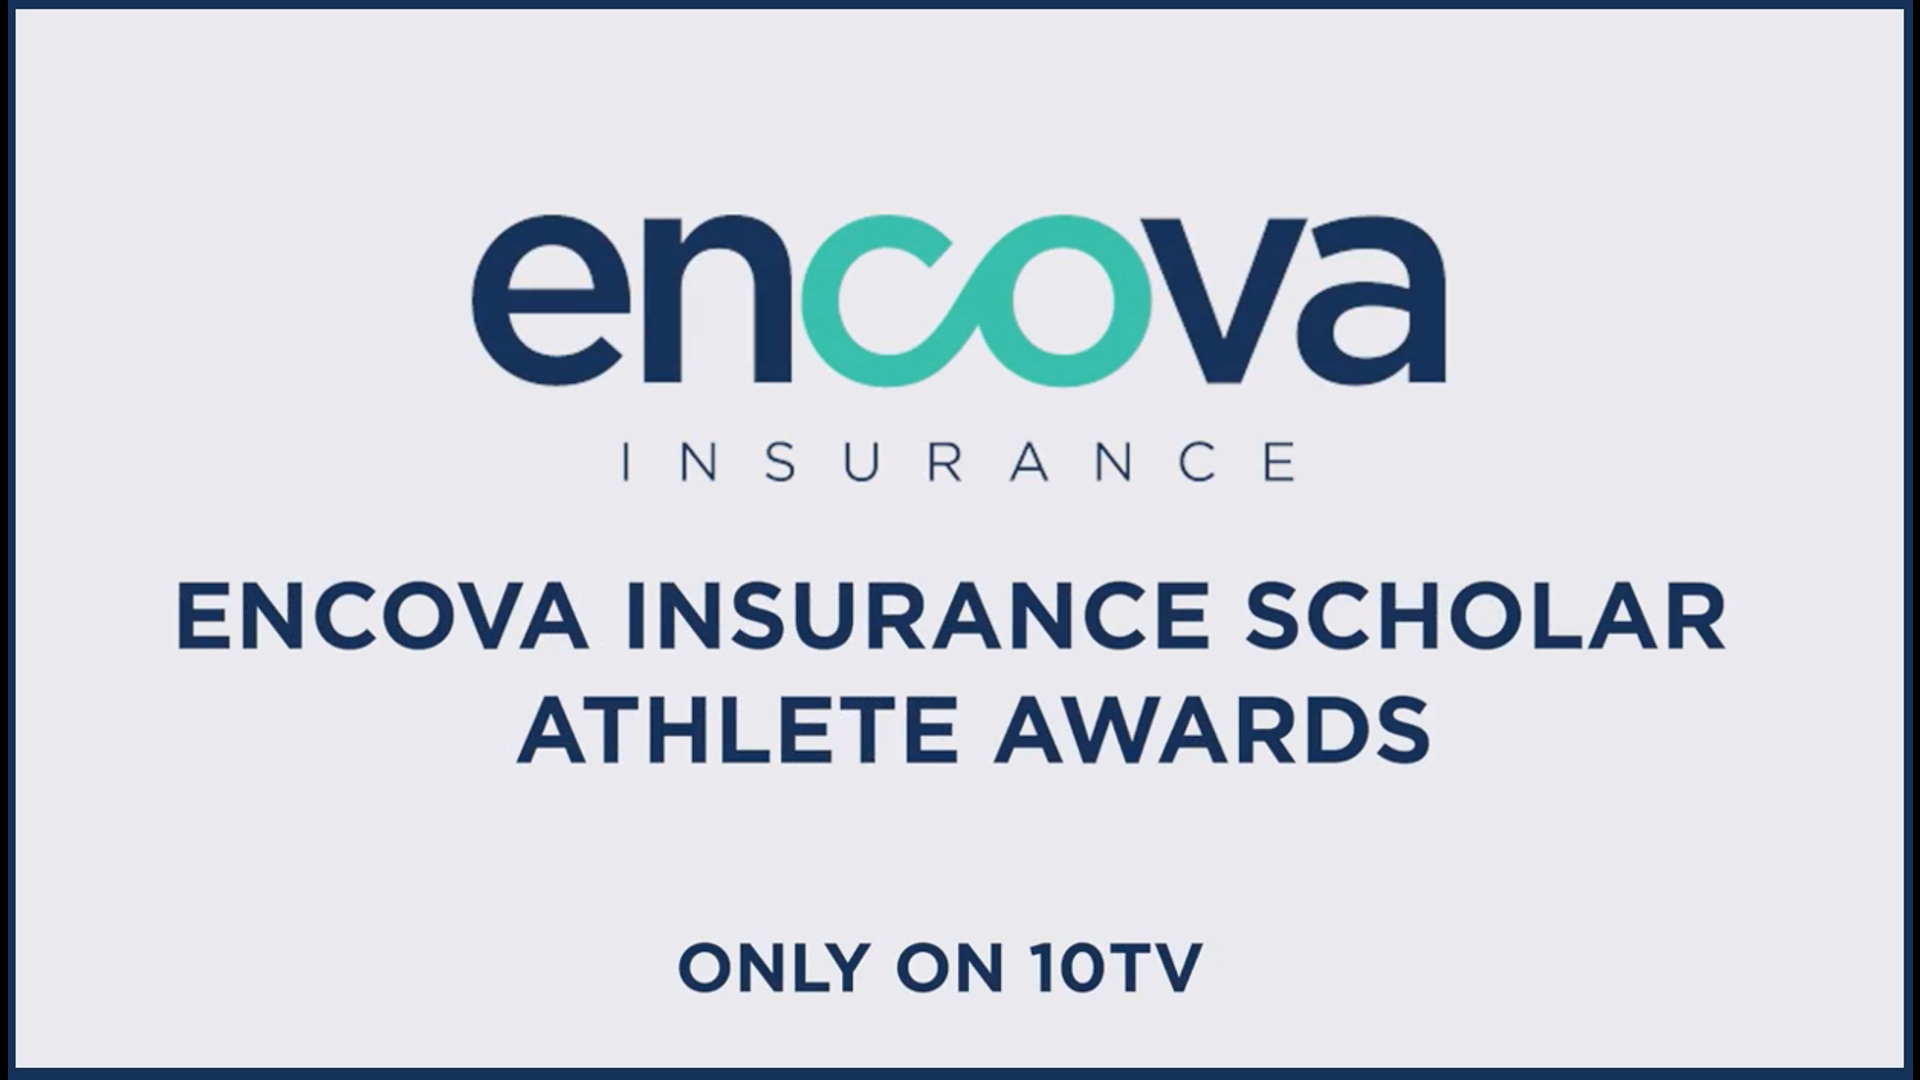 Wycuff and McClaskey each received a $3,000 scholarship from Encova Insurance based on their community involvement, academic and athletic achievements.